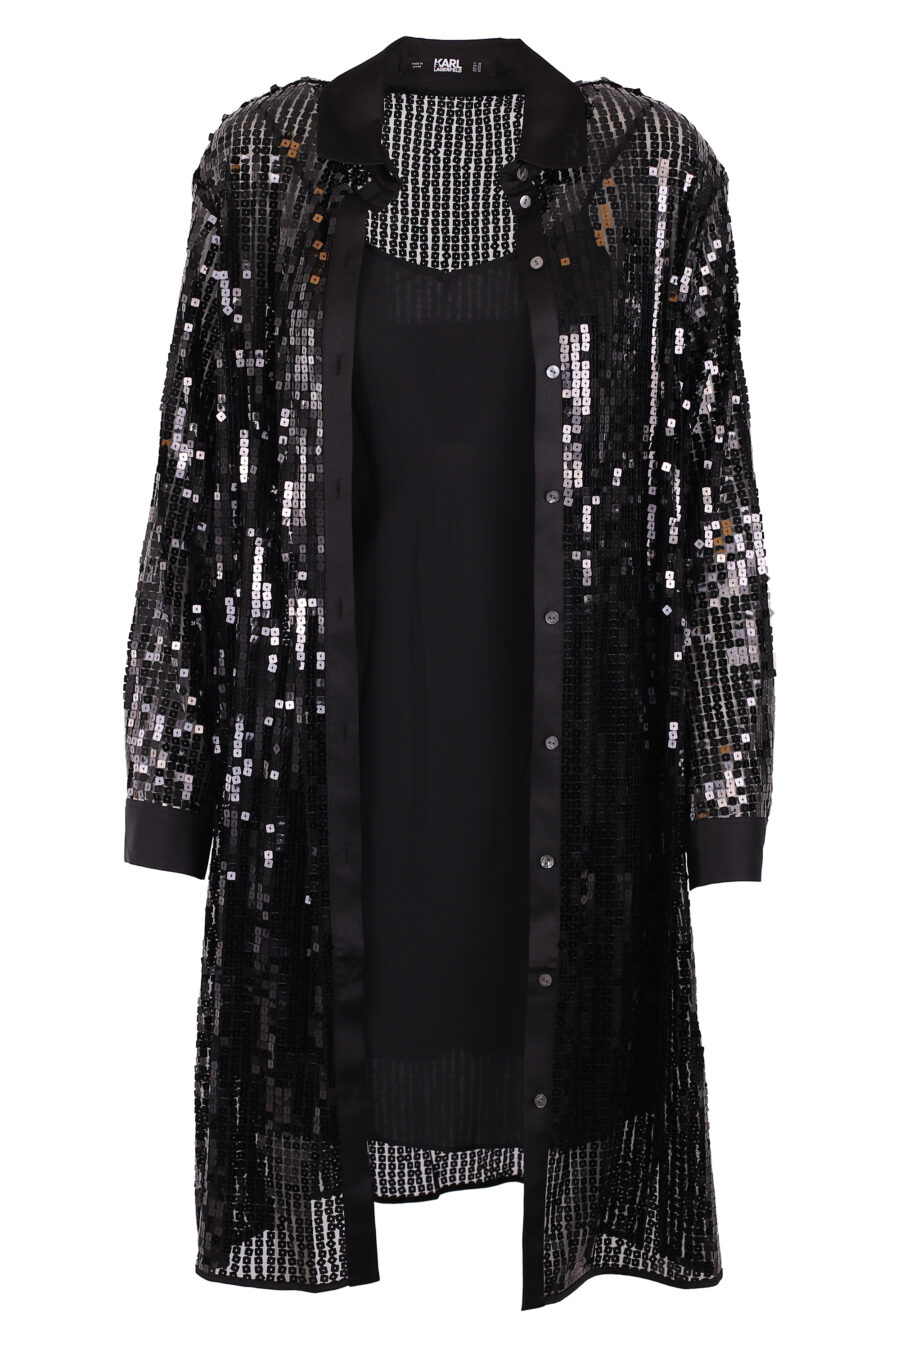 Black tunic dress with sequins - IMG 6263